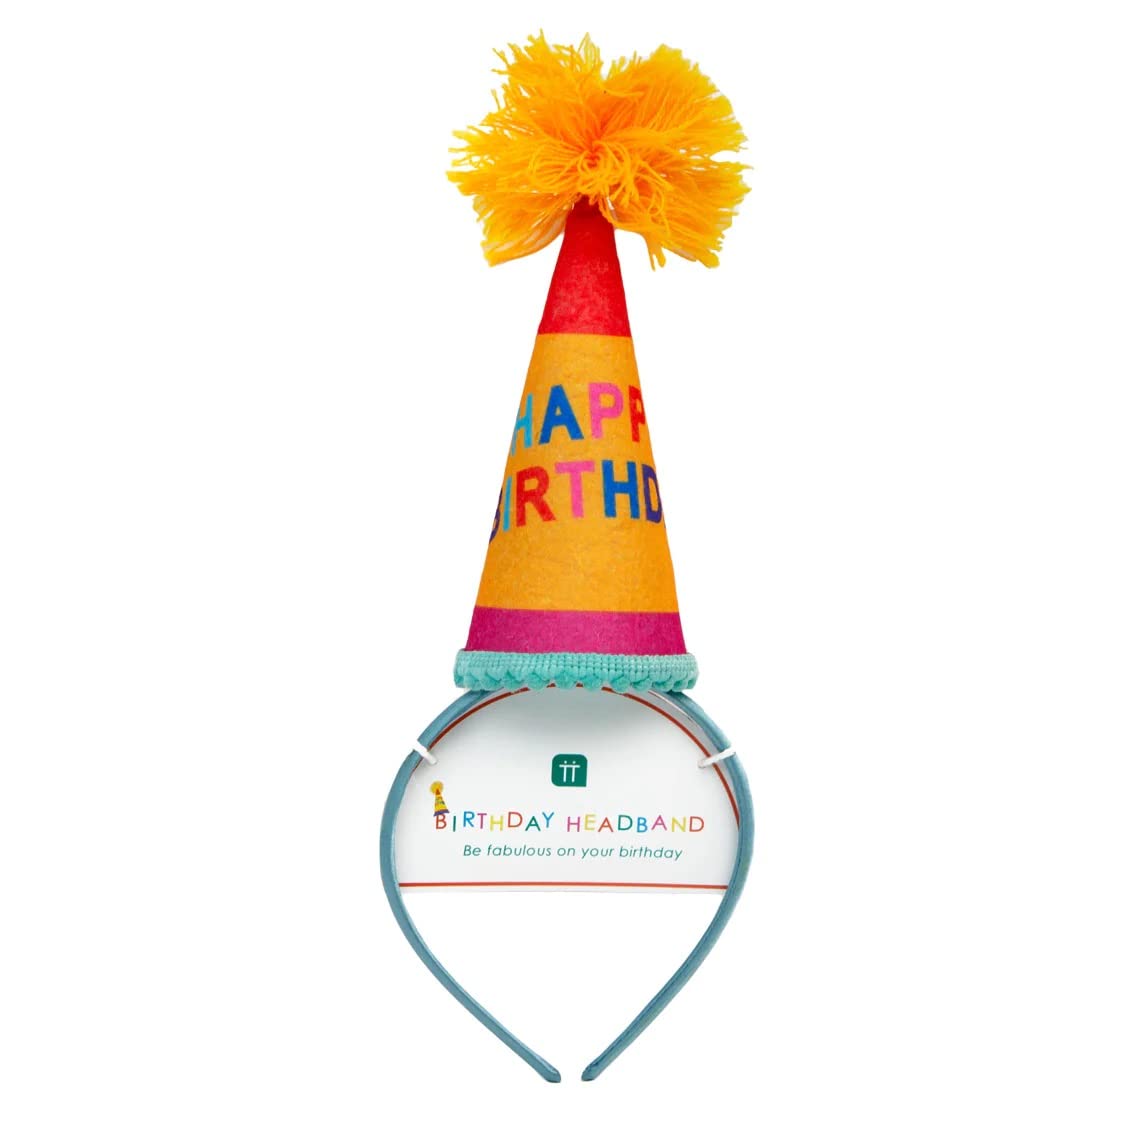 Talking Tables Colourful Birthday Party Hat Headband - Birthday Hair Band For Adults, Children, Boys And Girls - Fit All Head Sizes